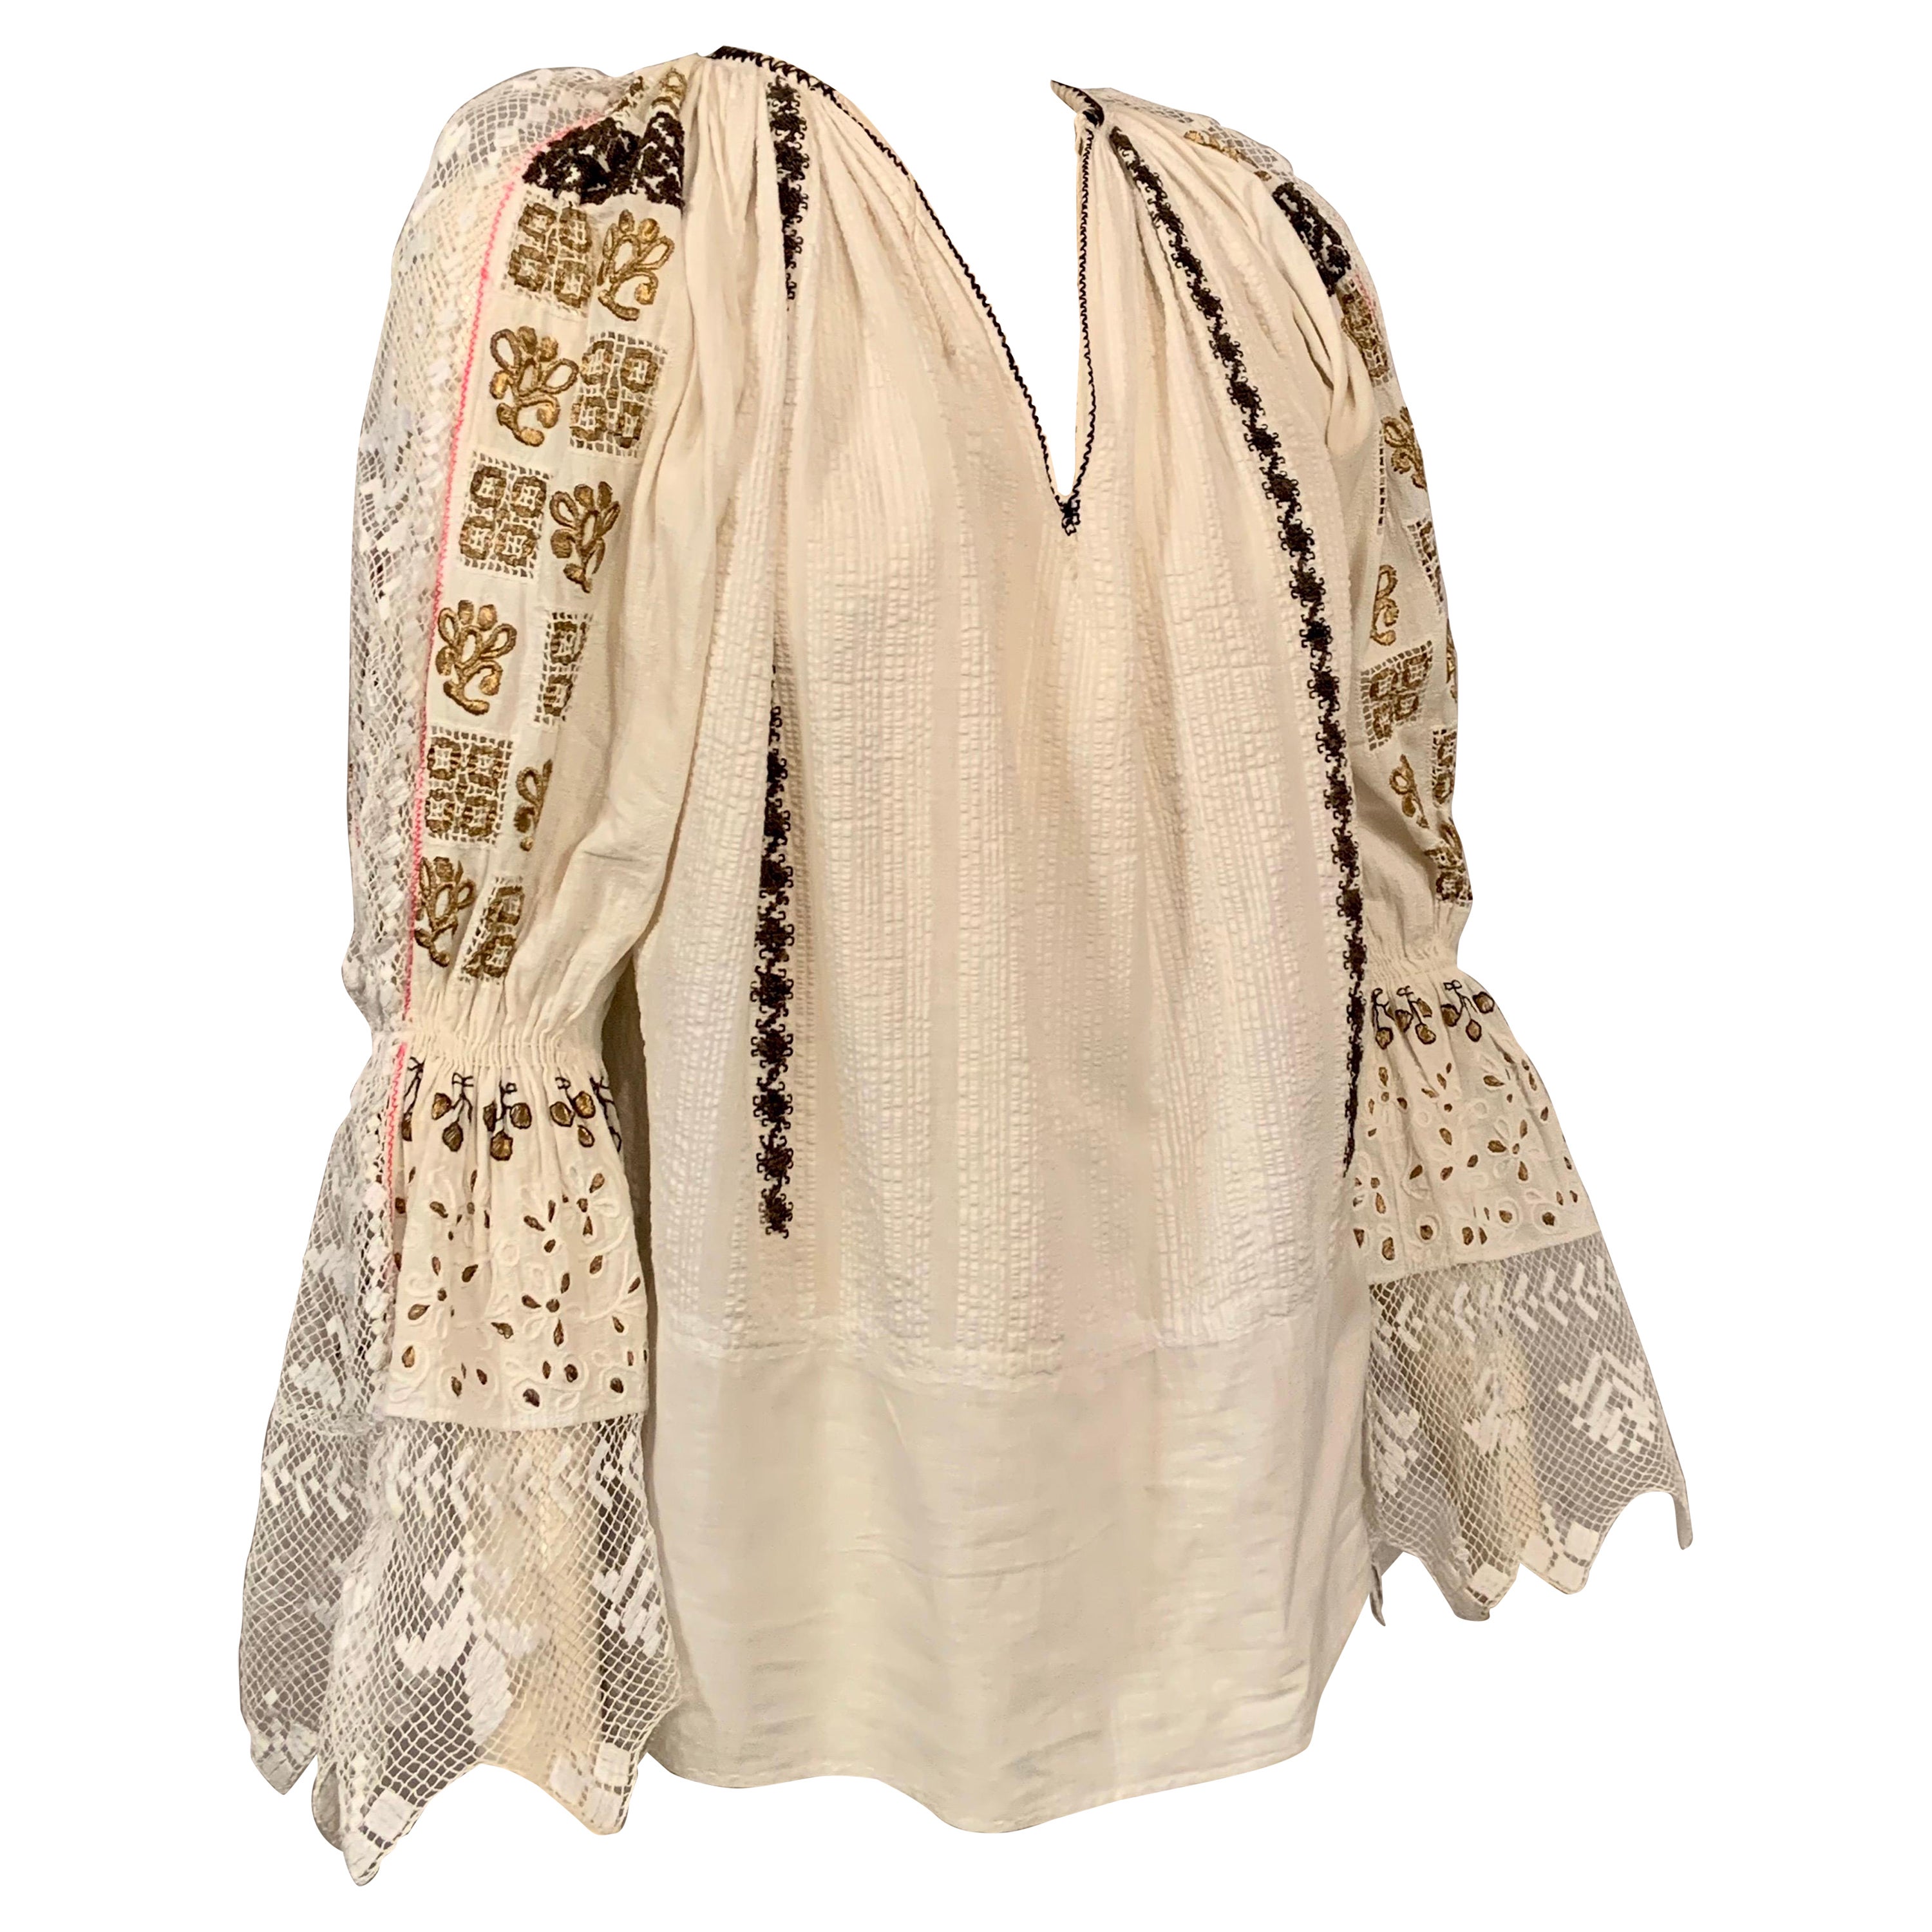 Romanian Blouse with Lace Eyelet and Black and Metallic Gold Embroidery